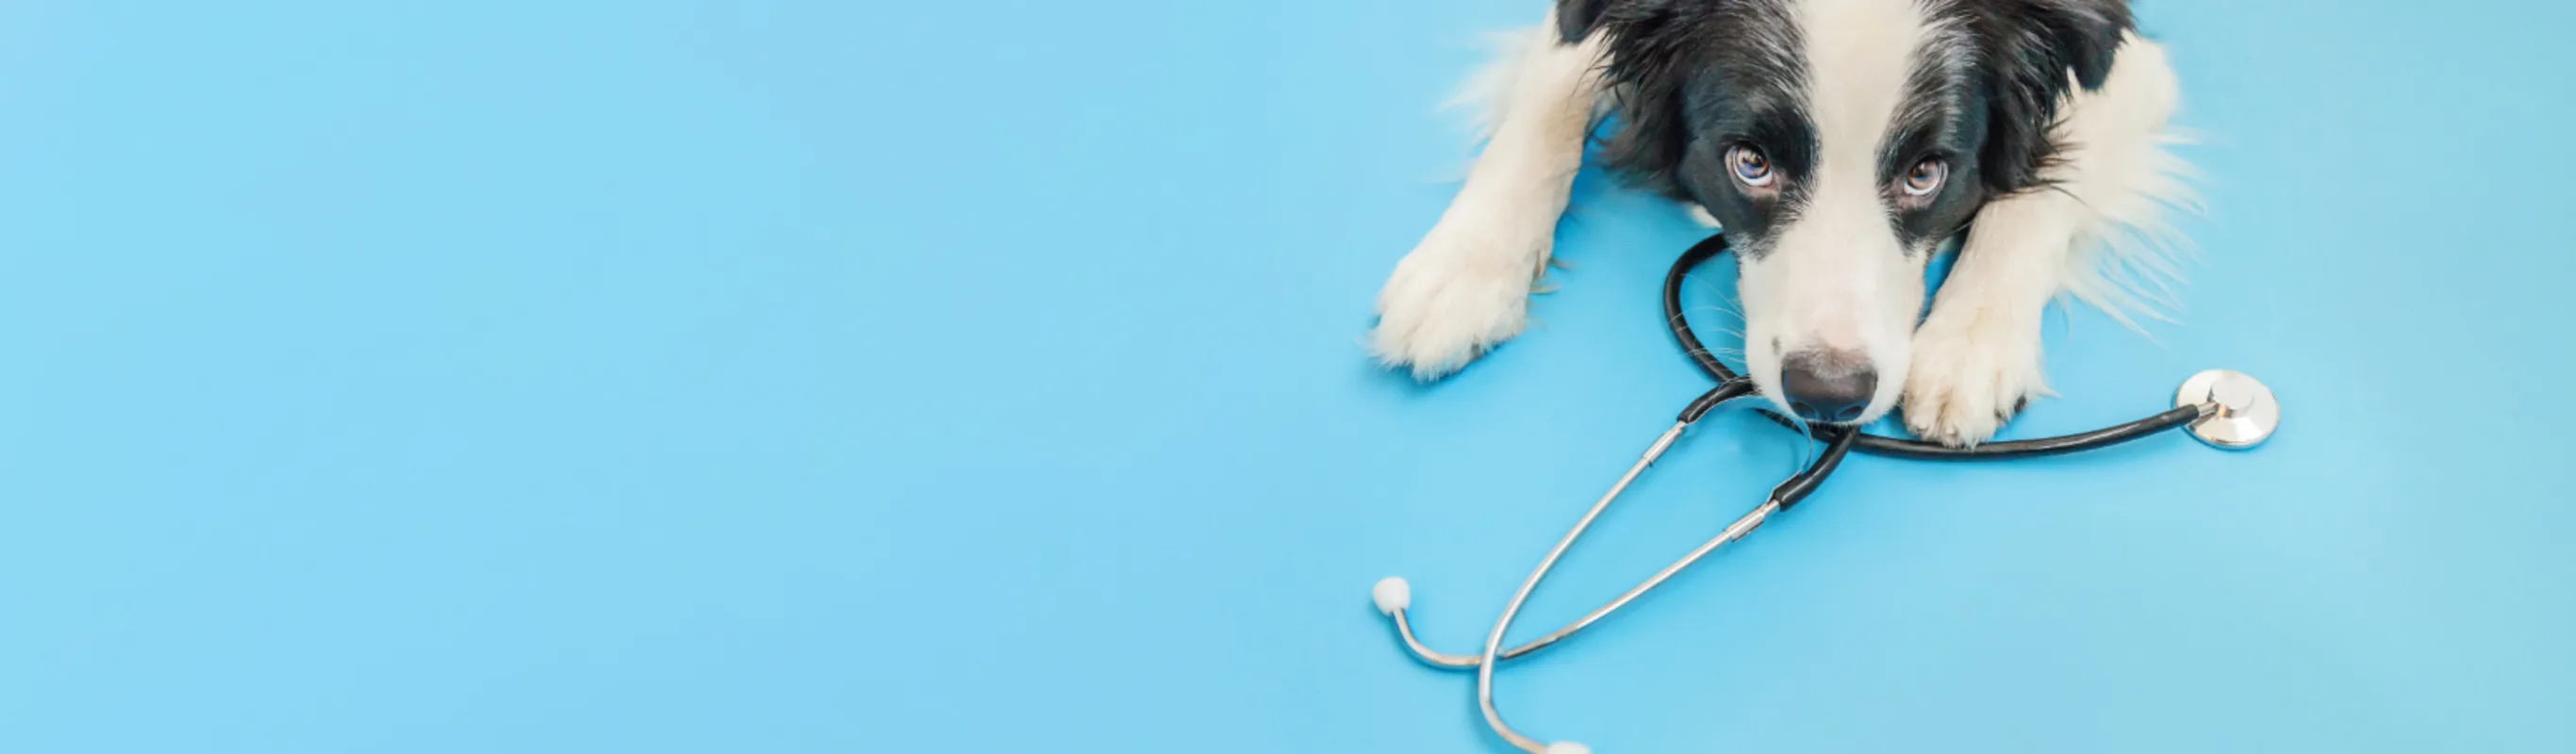 Border Collie (Dog) with Stethoscope on a Light Blue Studio Background